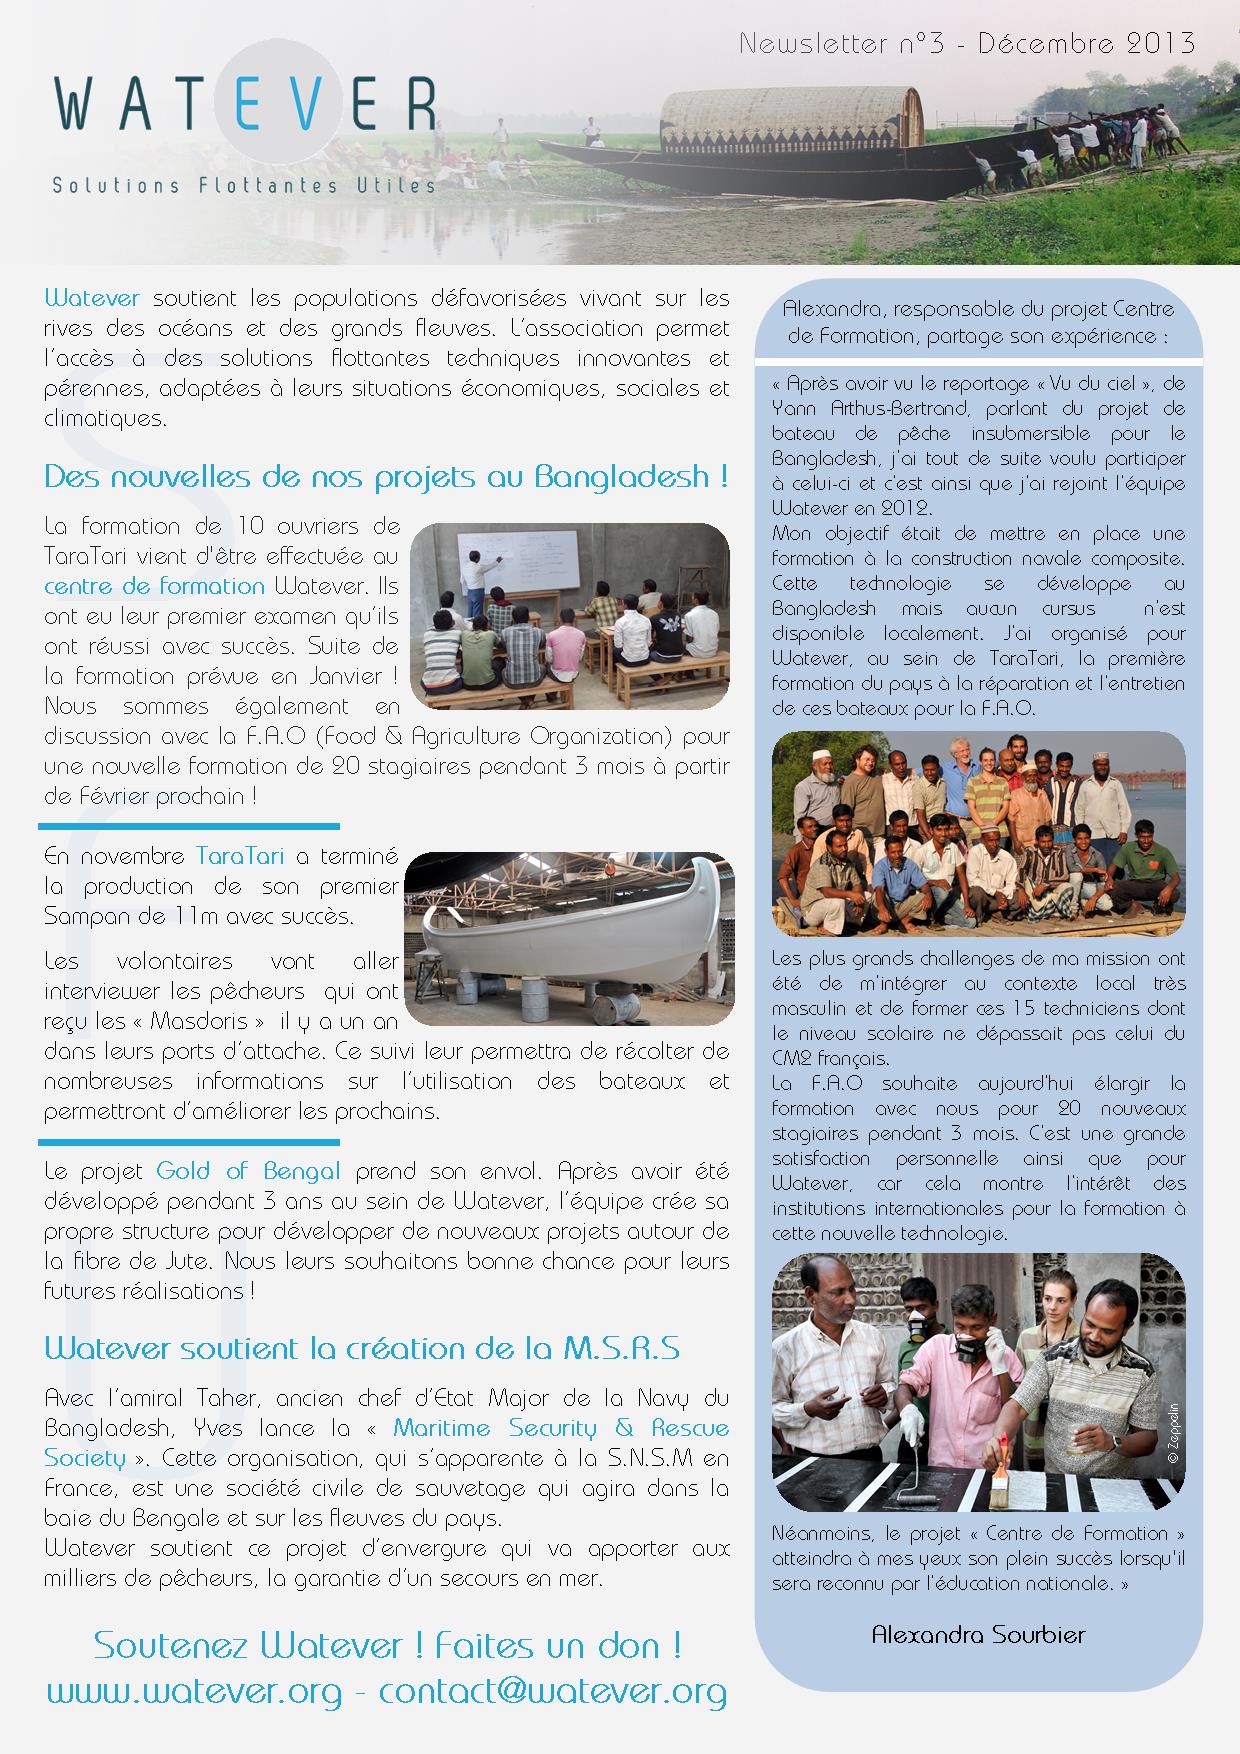 Newsletter Watever n°3 Décembre 2013 Page 1/2